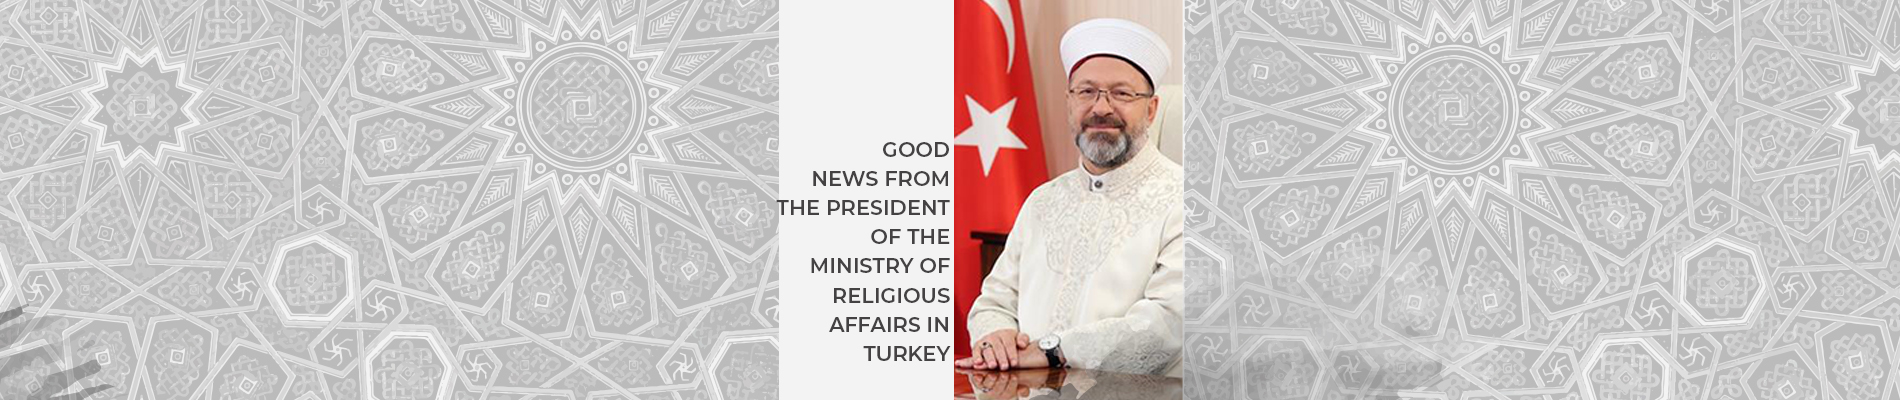 New good news from the President of Religious Affairs: 